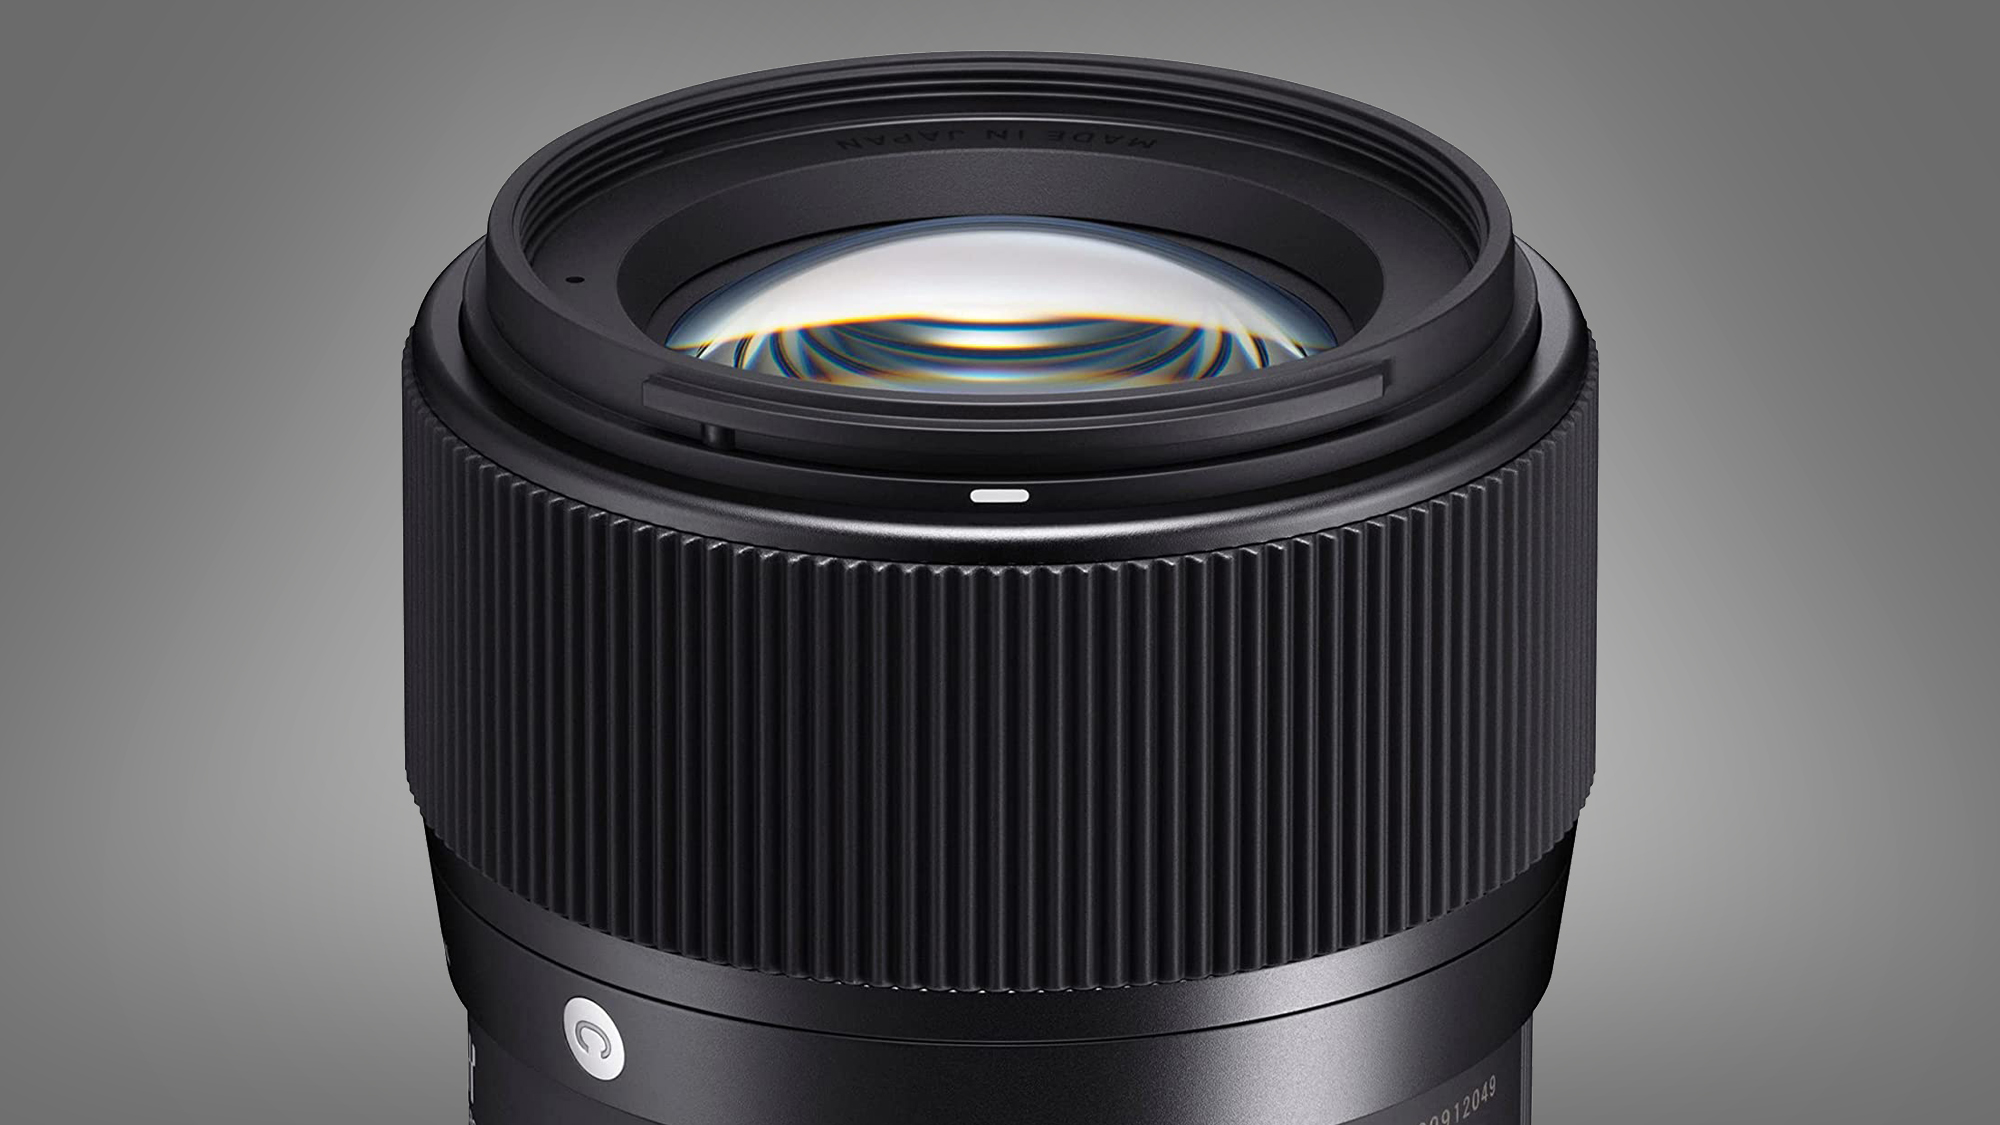 Sigma expected to finally launch three lenses for Fujifilm X-series cameras soon